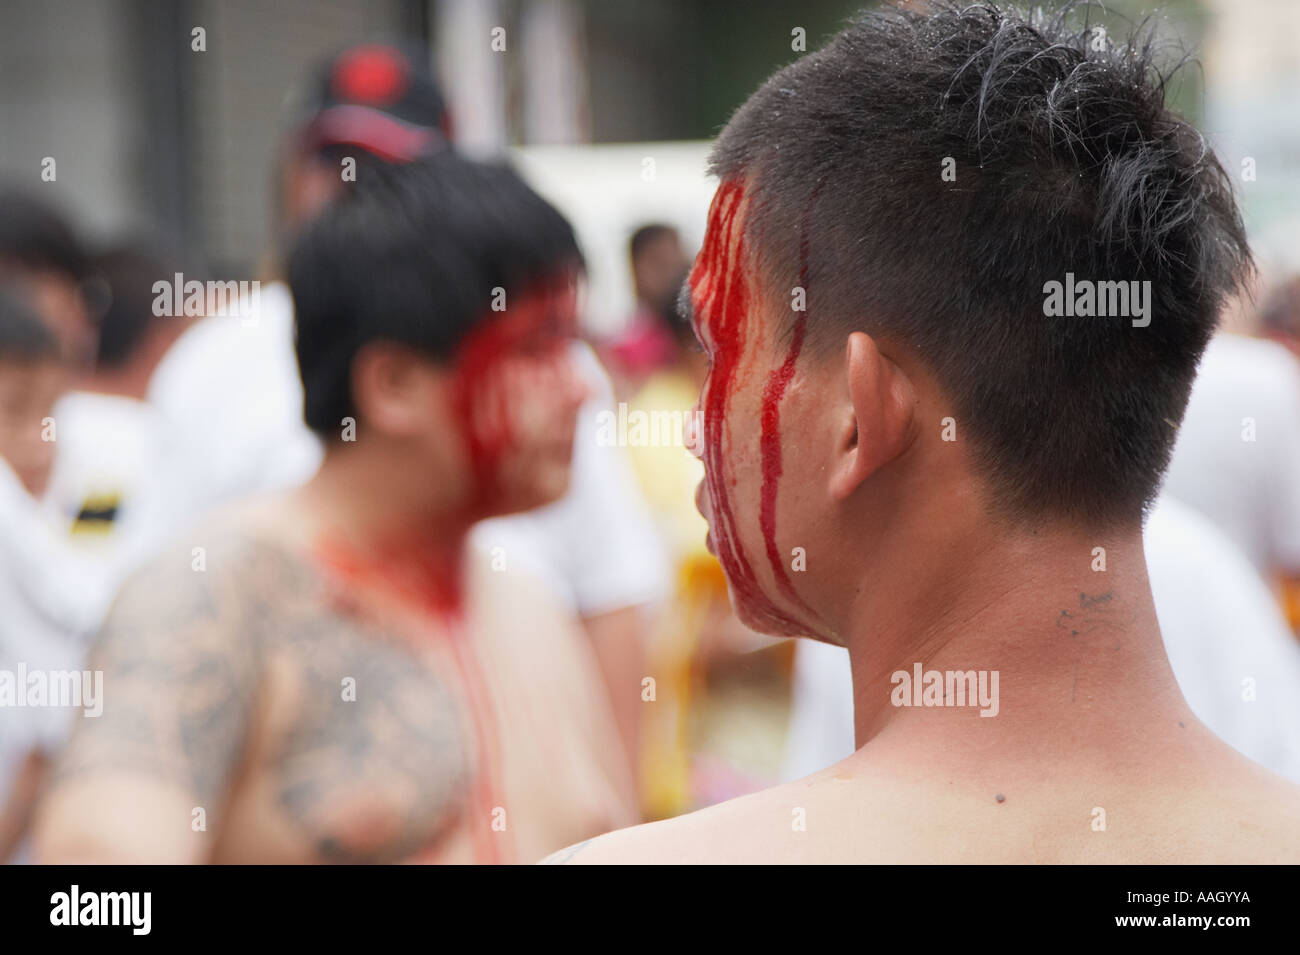 Matsu Devotees With Self-Inflicted Wounds Stock Photo